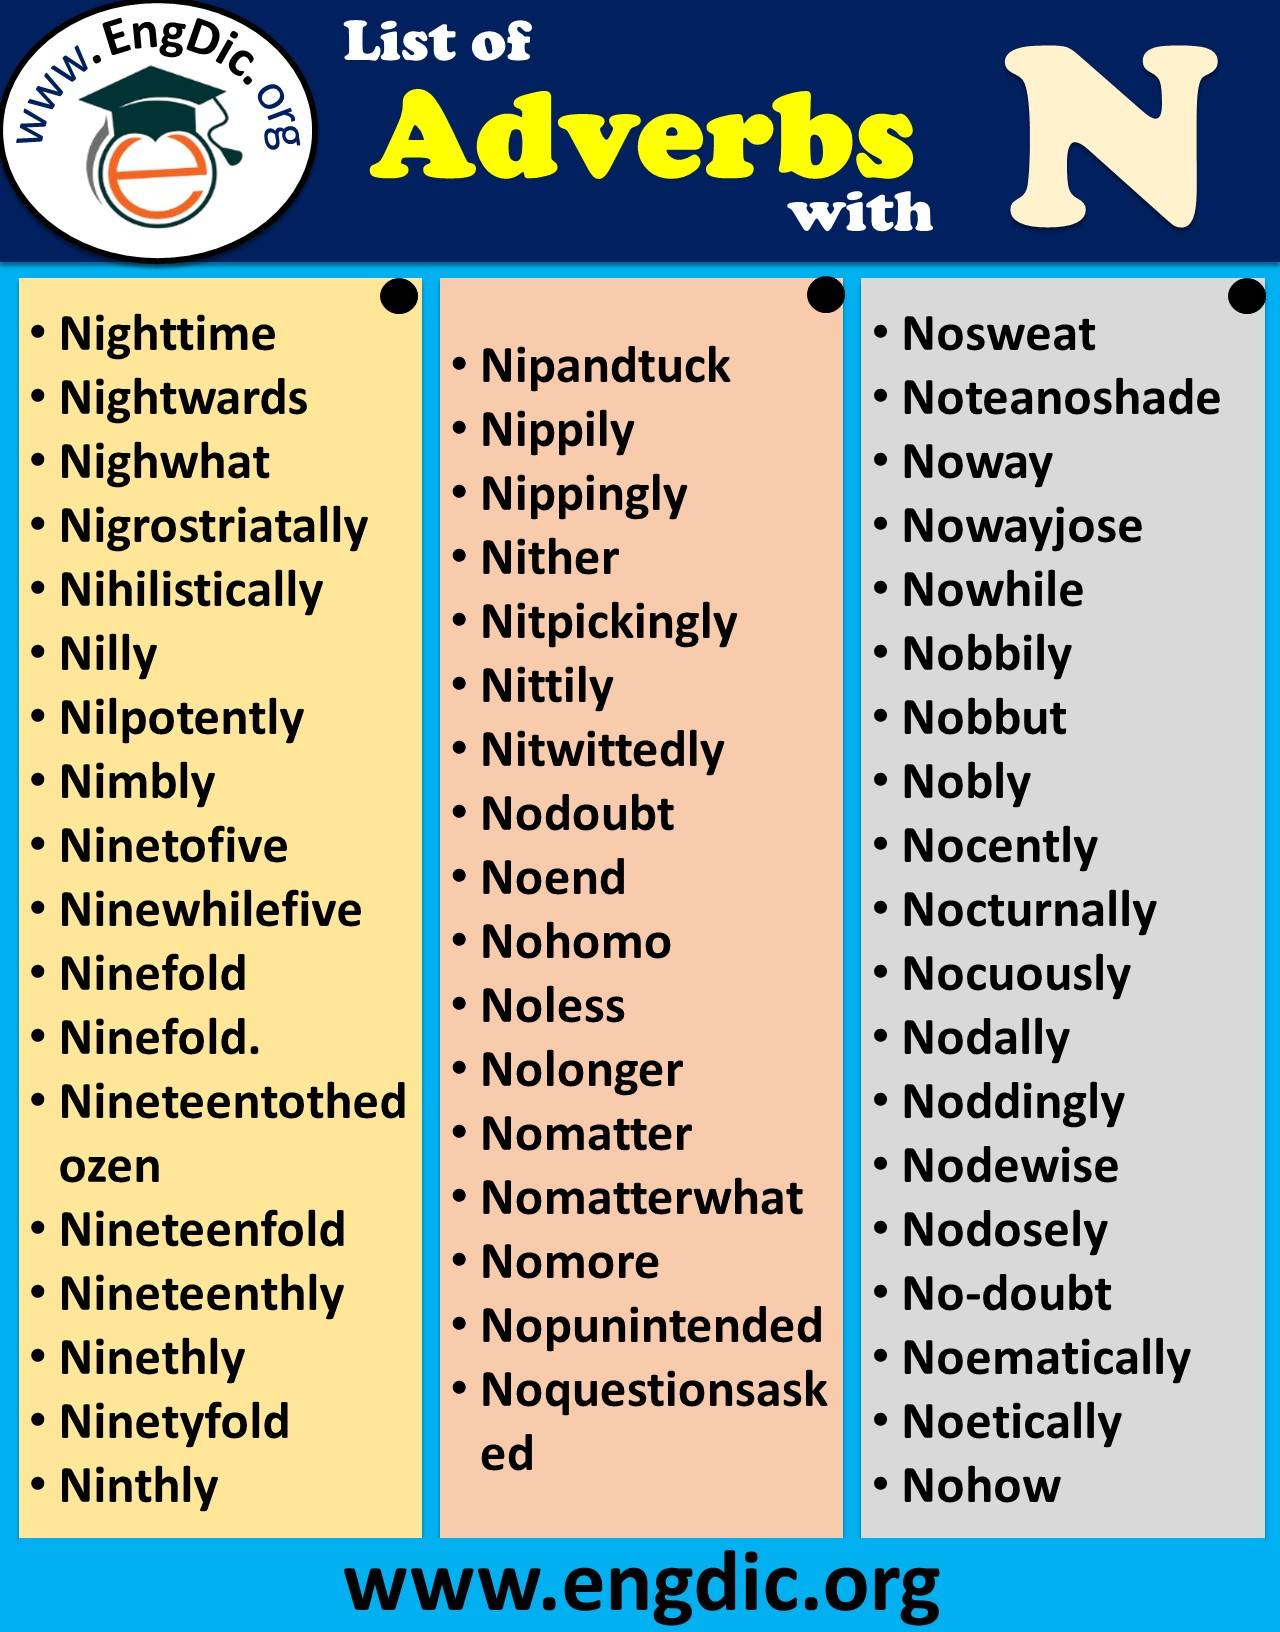 adverbs that start with consonants